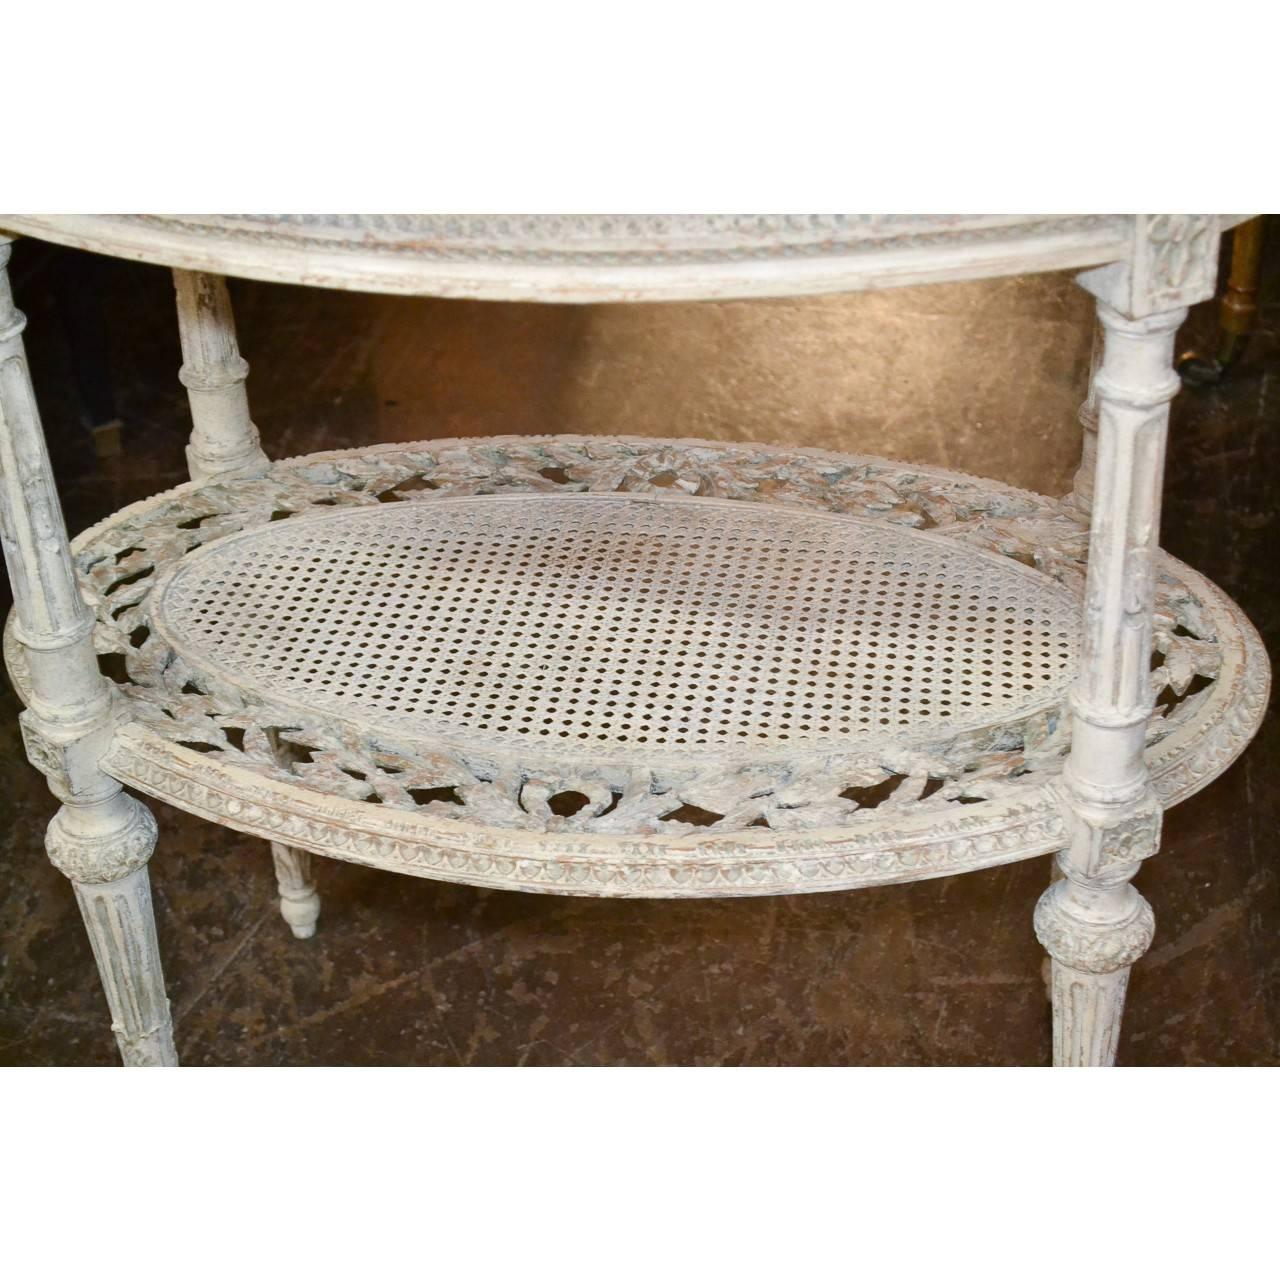 Pretty oval occasional table handcrafted and hand-painted in soft off-white.
Complimentary colored bevelled marble top. Cane work on shelf is in very good condition.
Made in France in the Louis XVI style, circa 1880.